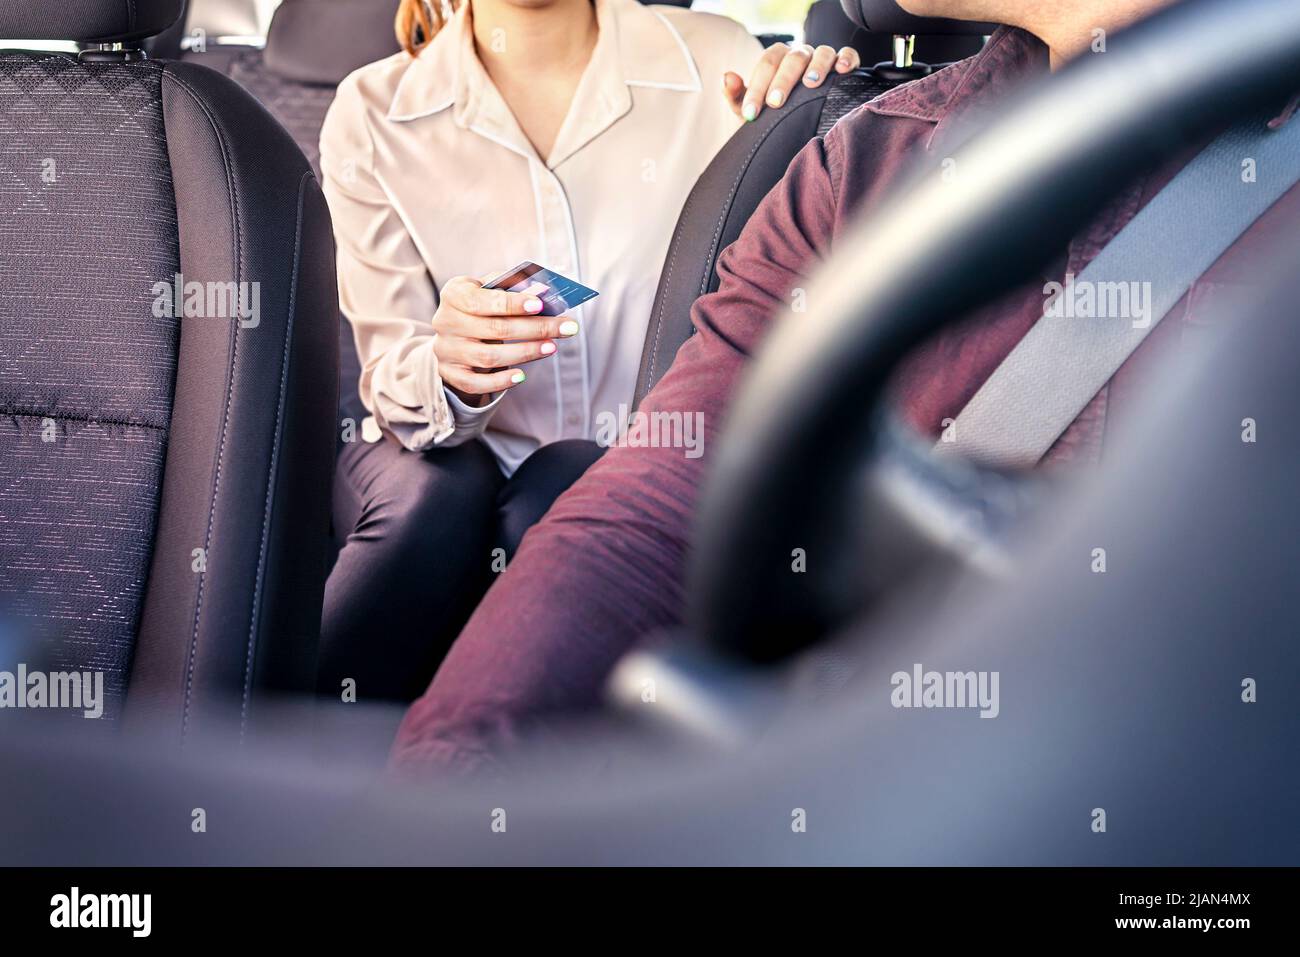 Taxi and card payment. Customer paying cab fare. Woman giving money to driver. Transaction security, scam or fraud concept. Passenger purchase ride. Stock Photo